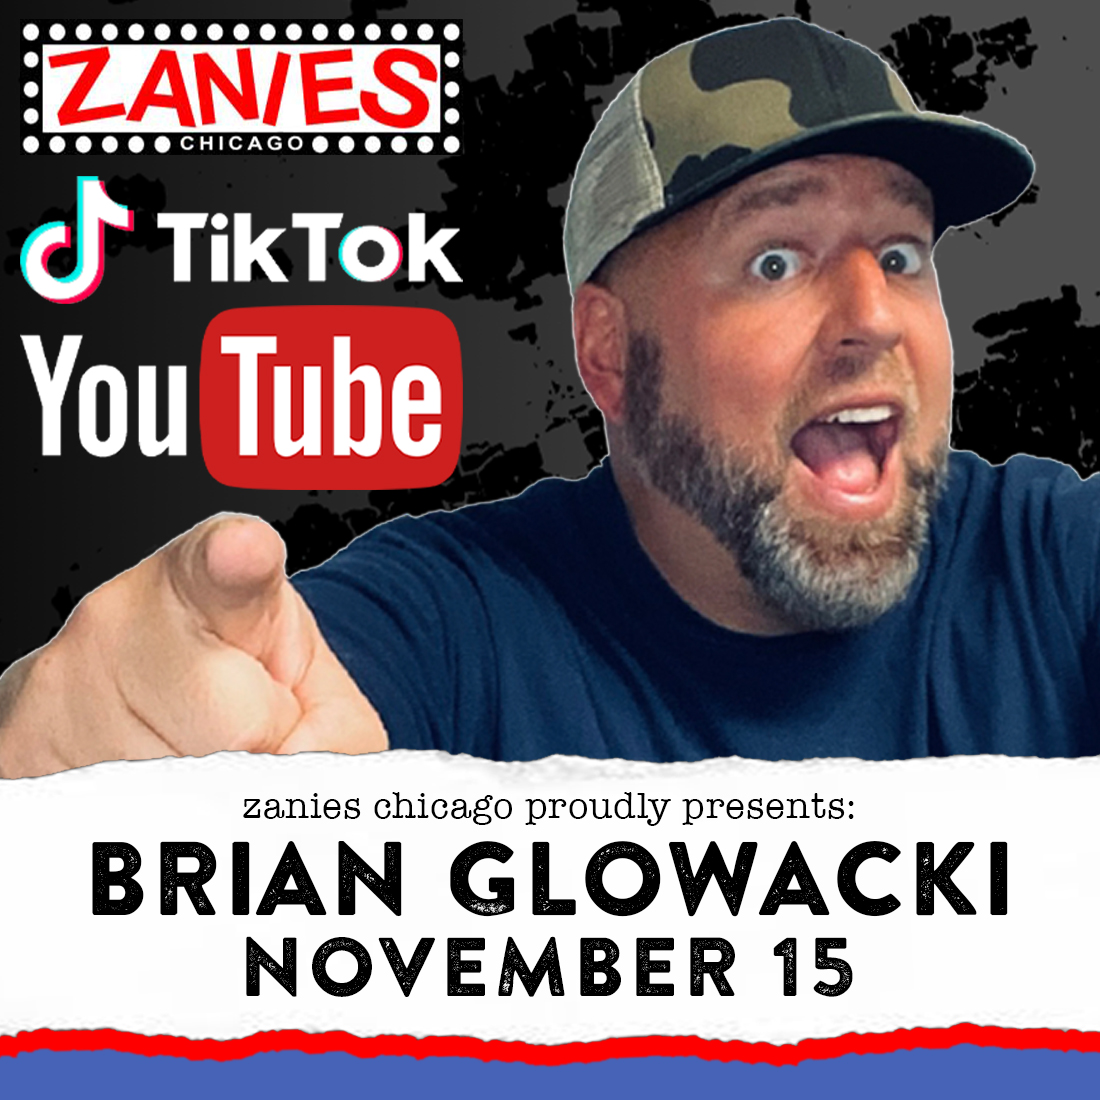 Comedian @BrianGlowacki brings his The Big Rowdy Comedy Tour to Zanies for one night only on November 15! With over 130K followers on TikTok, it's safe to say you don't want to miss this show, Chicago. Grab tickets while you can--> bit.ly/Chicago_BigRow…